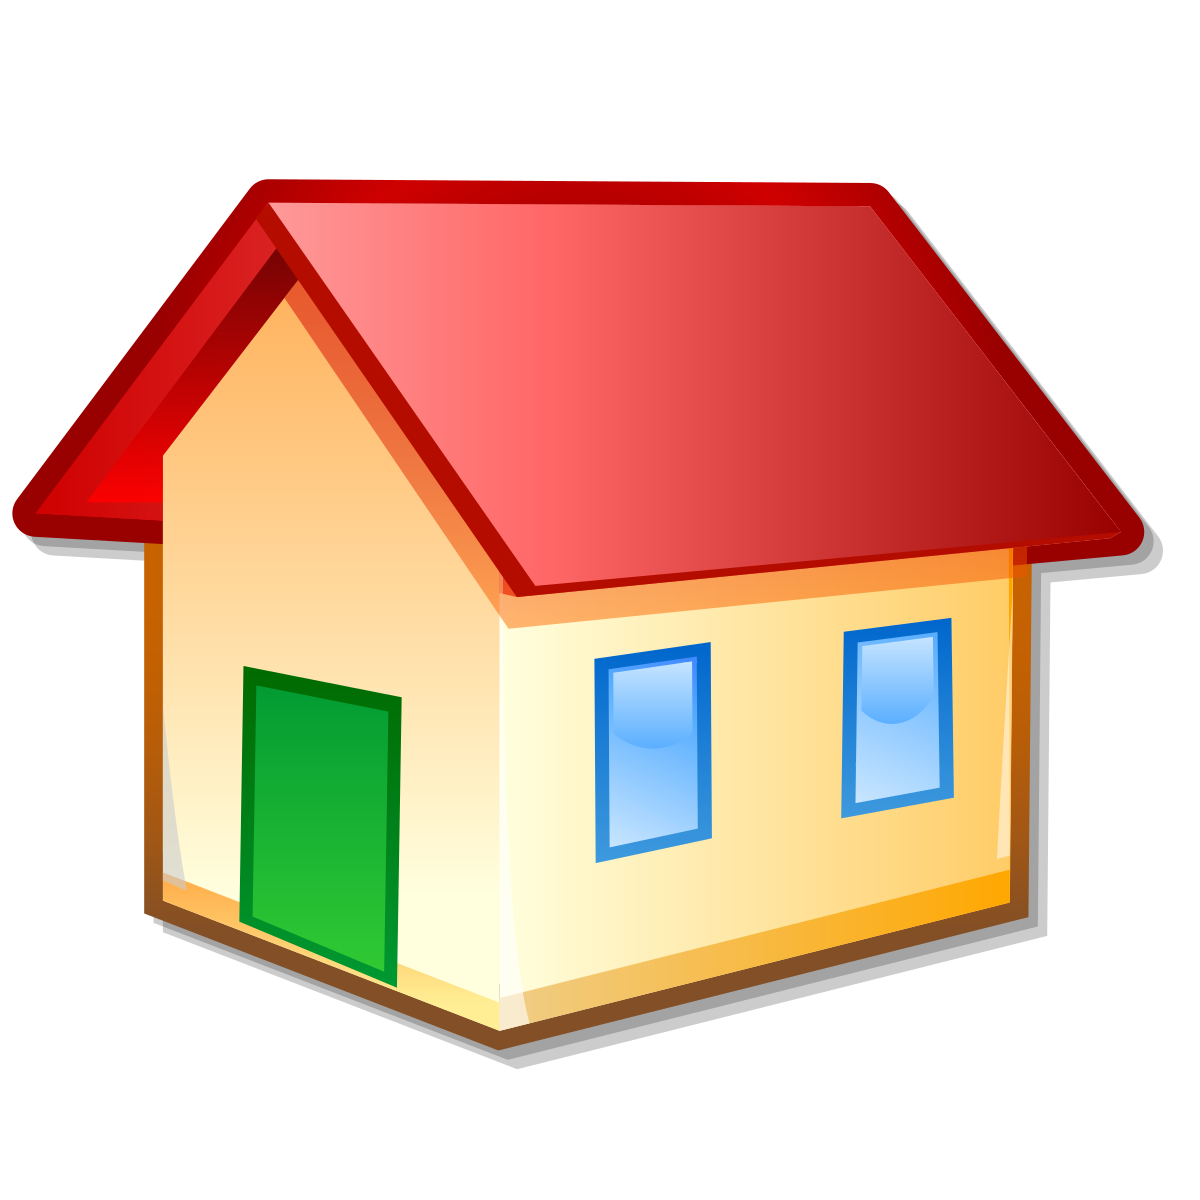 Download File:Gnome-home.svg - Wikimedia Commons